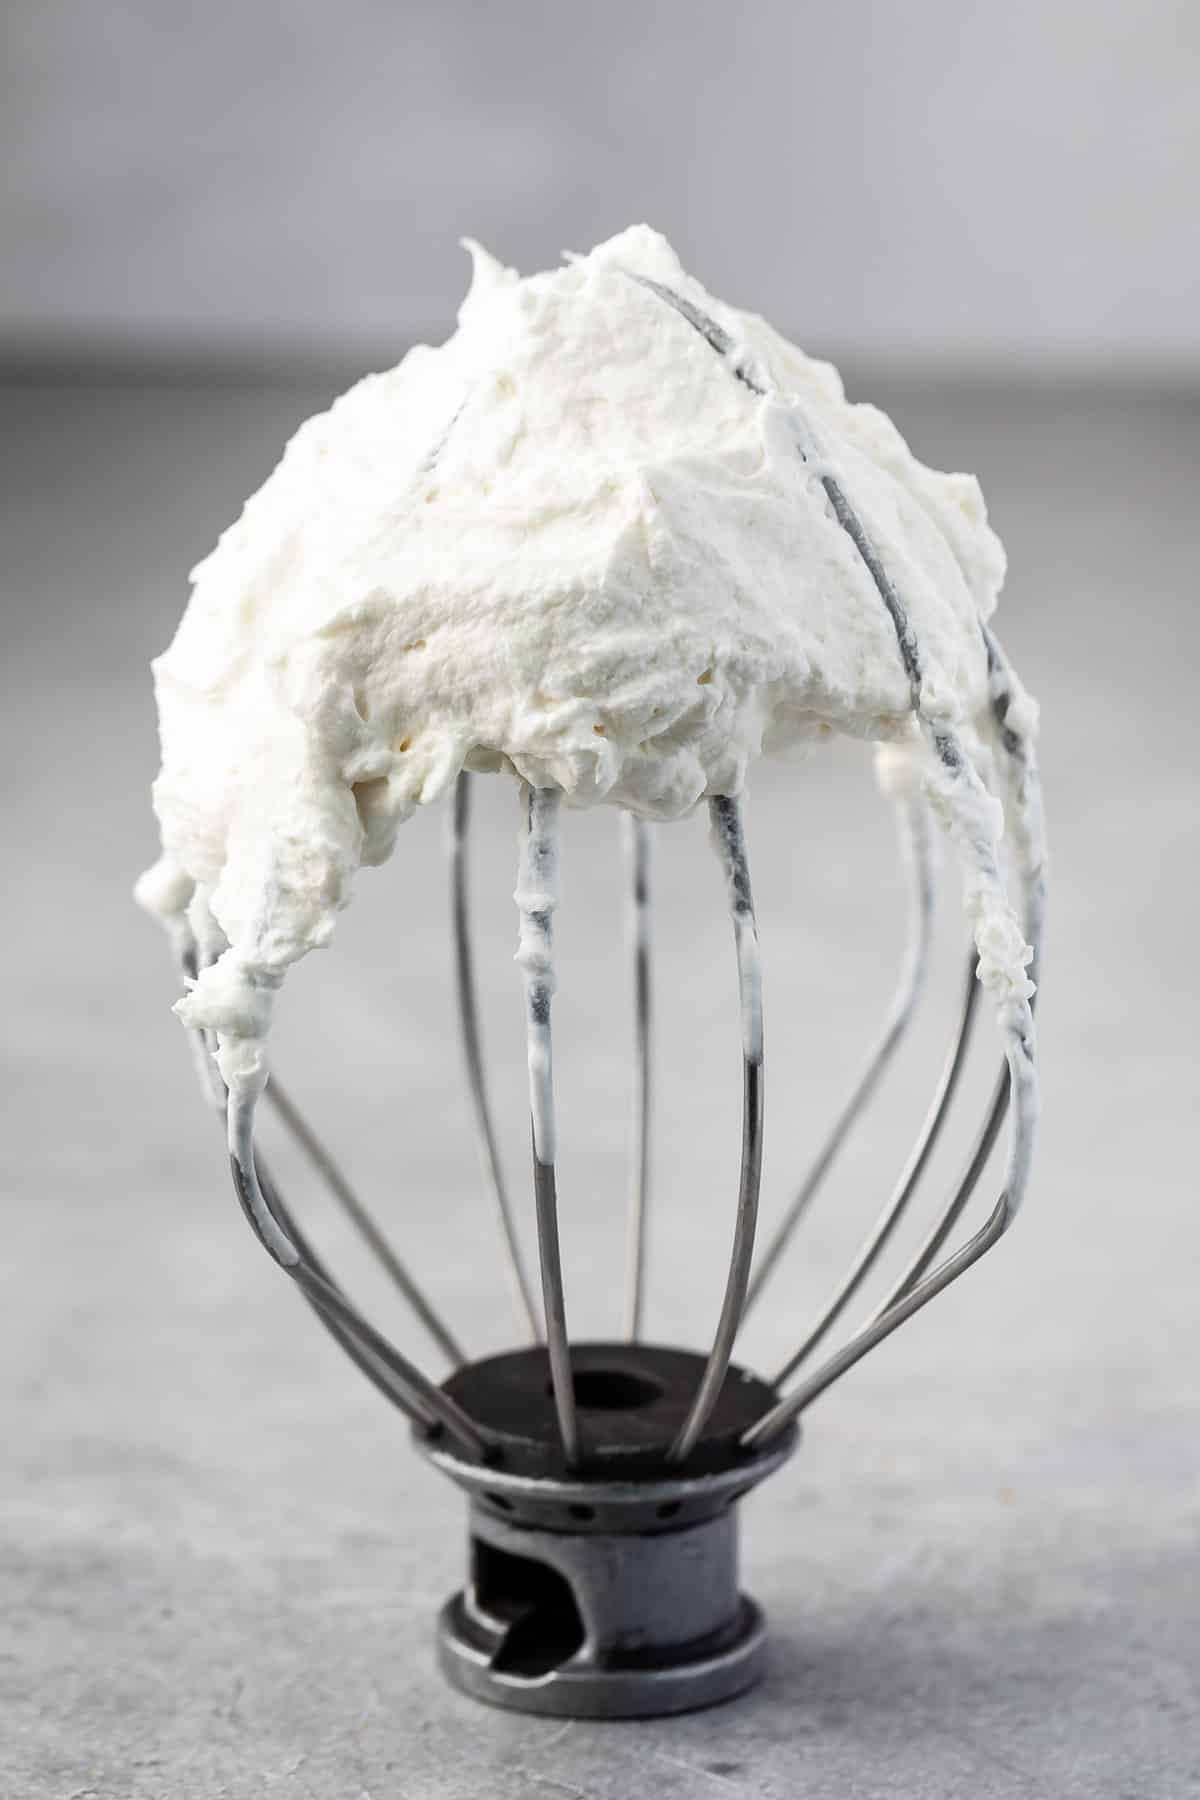 whipped cream on a mixer.